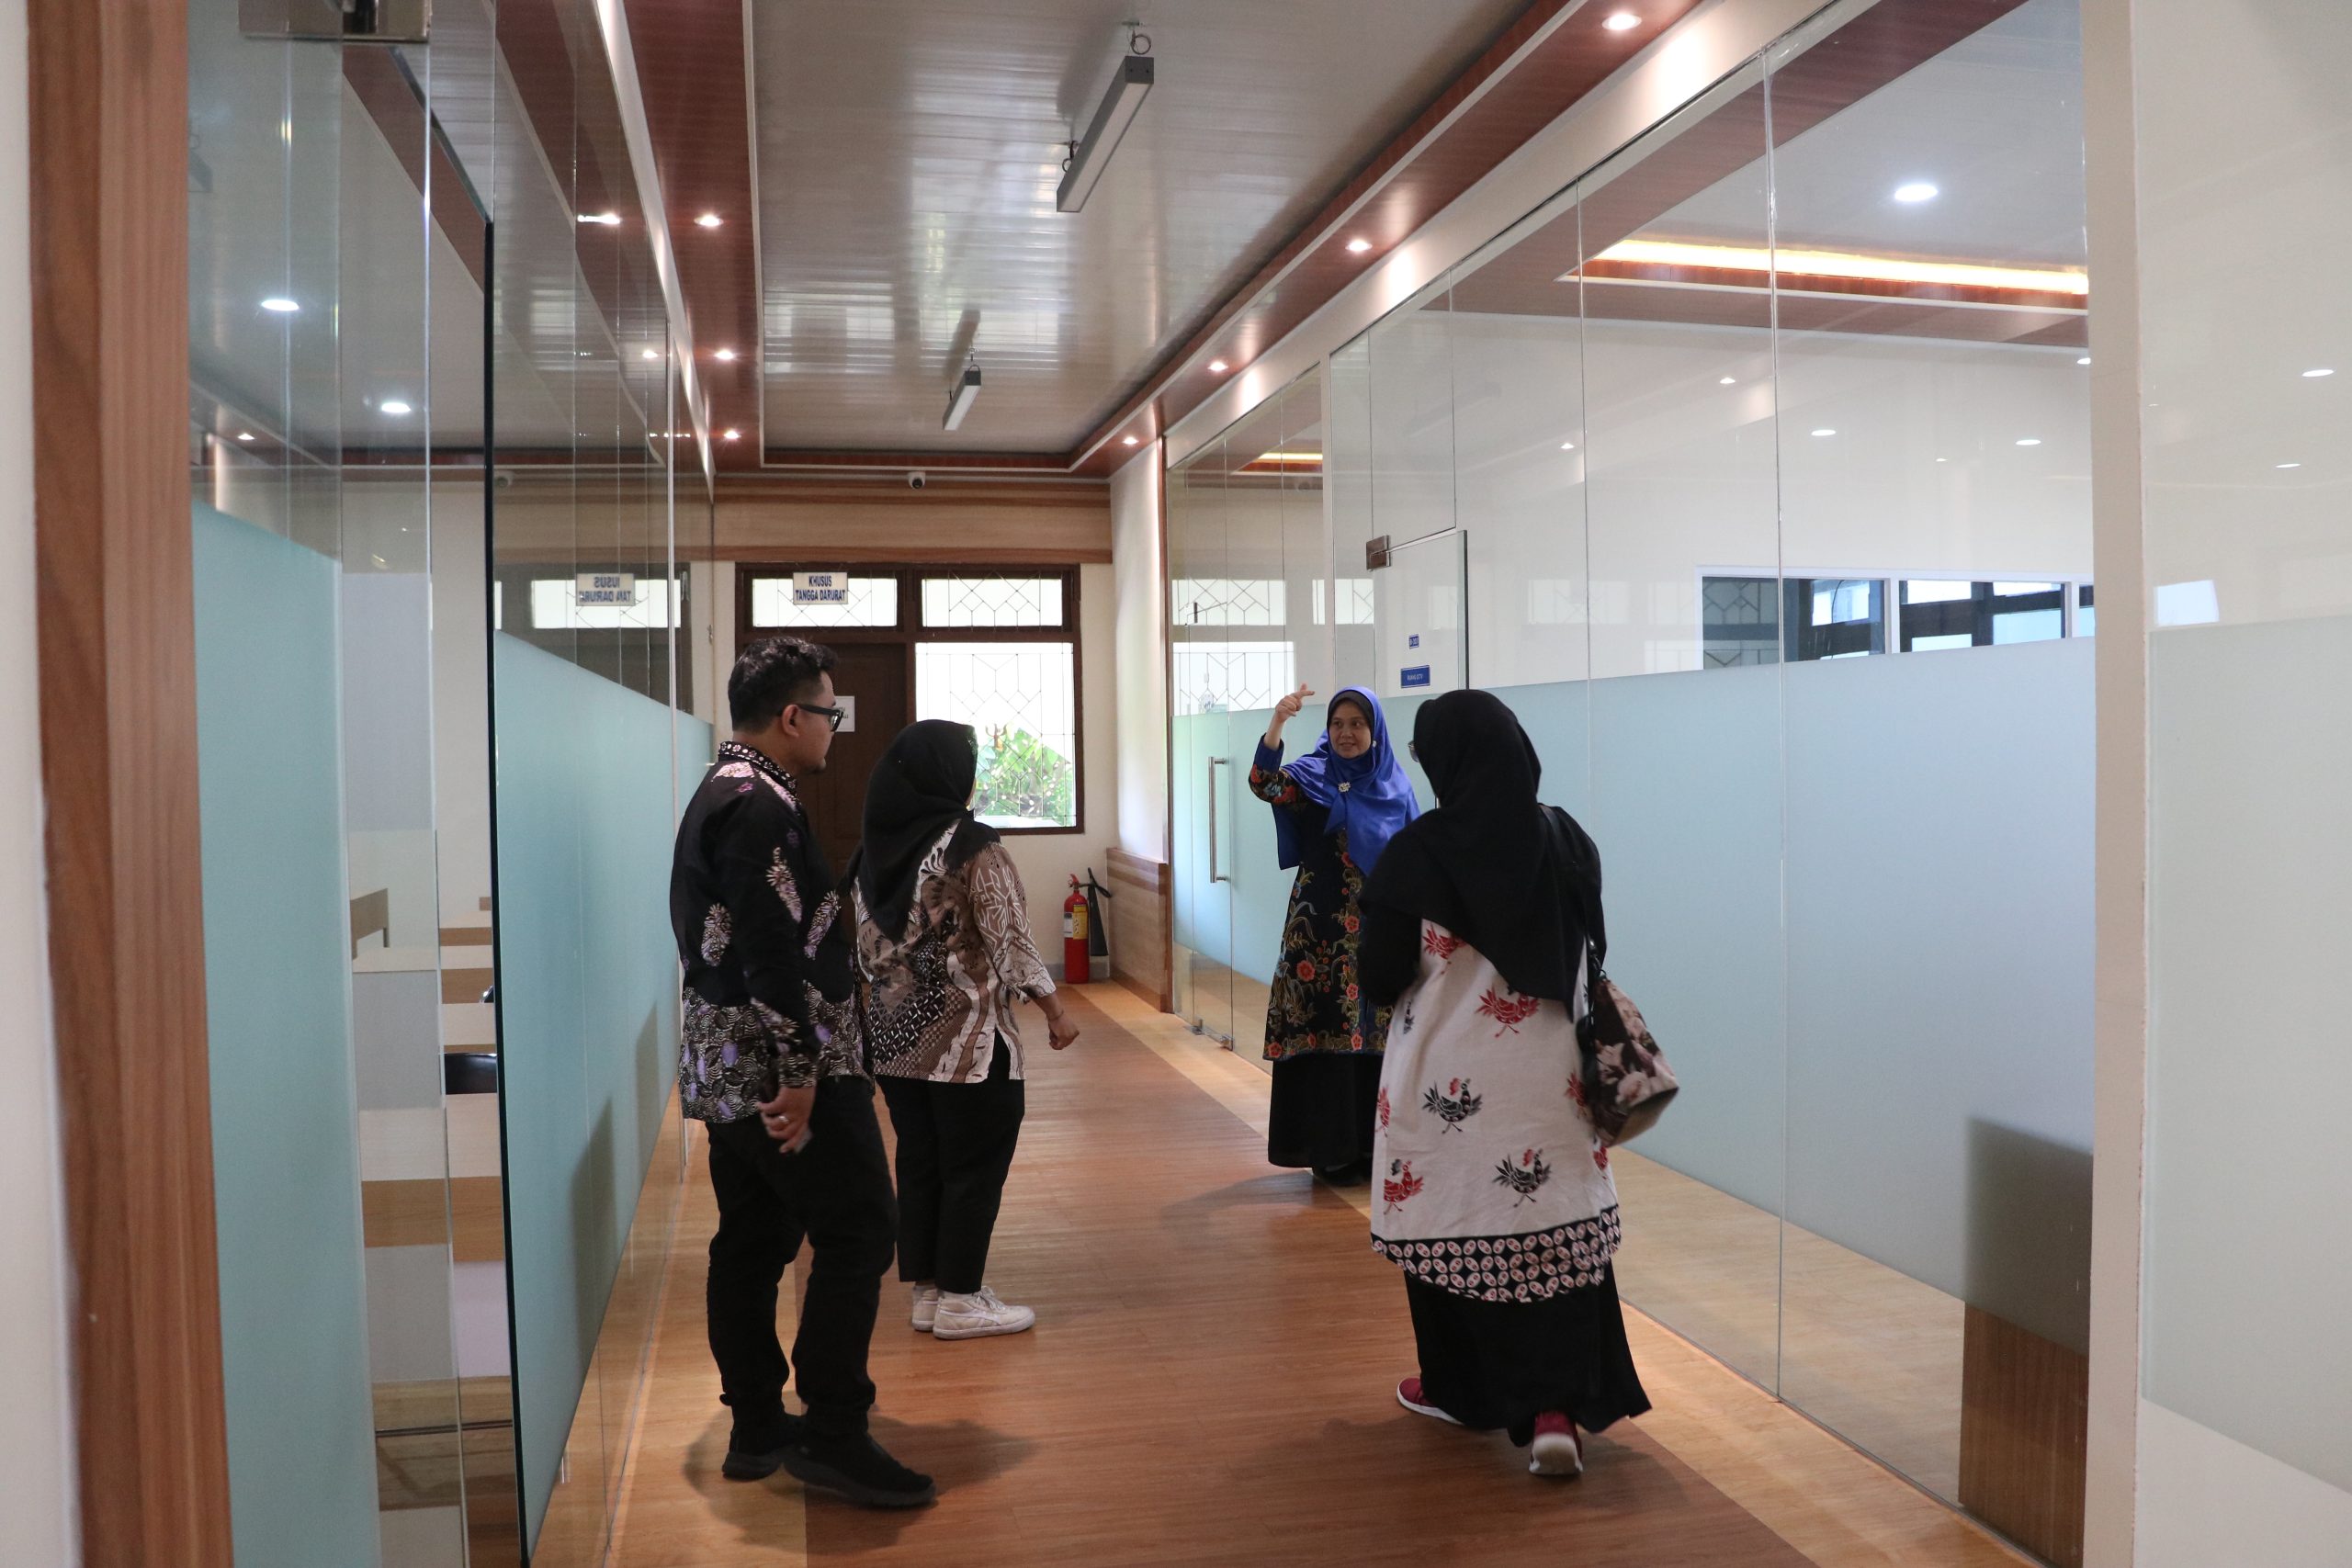 Receiving a Visit from UMS, The Faculty of Psychology UGM Discusses Laboratory Management